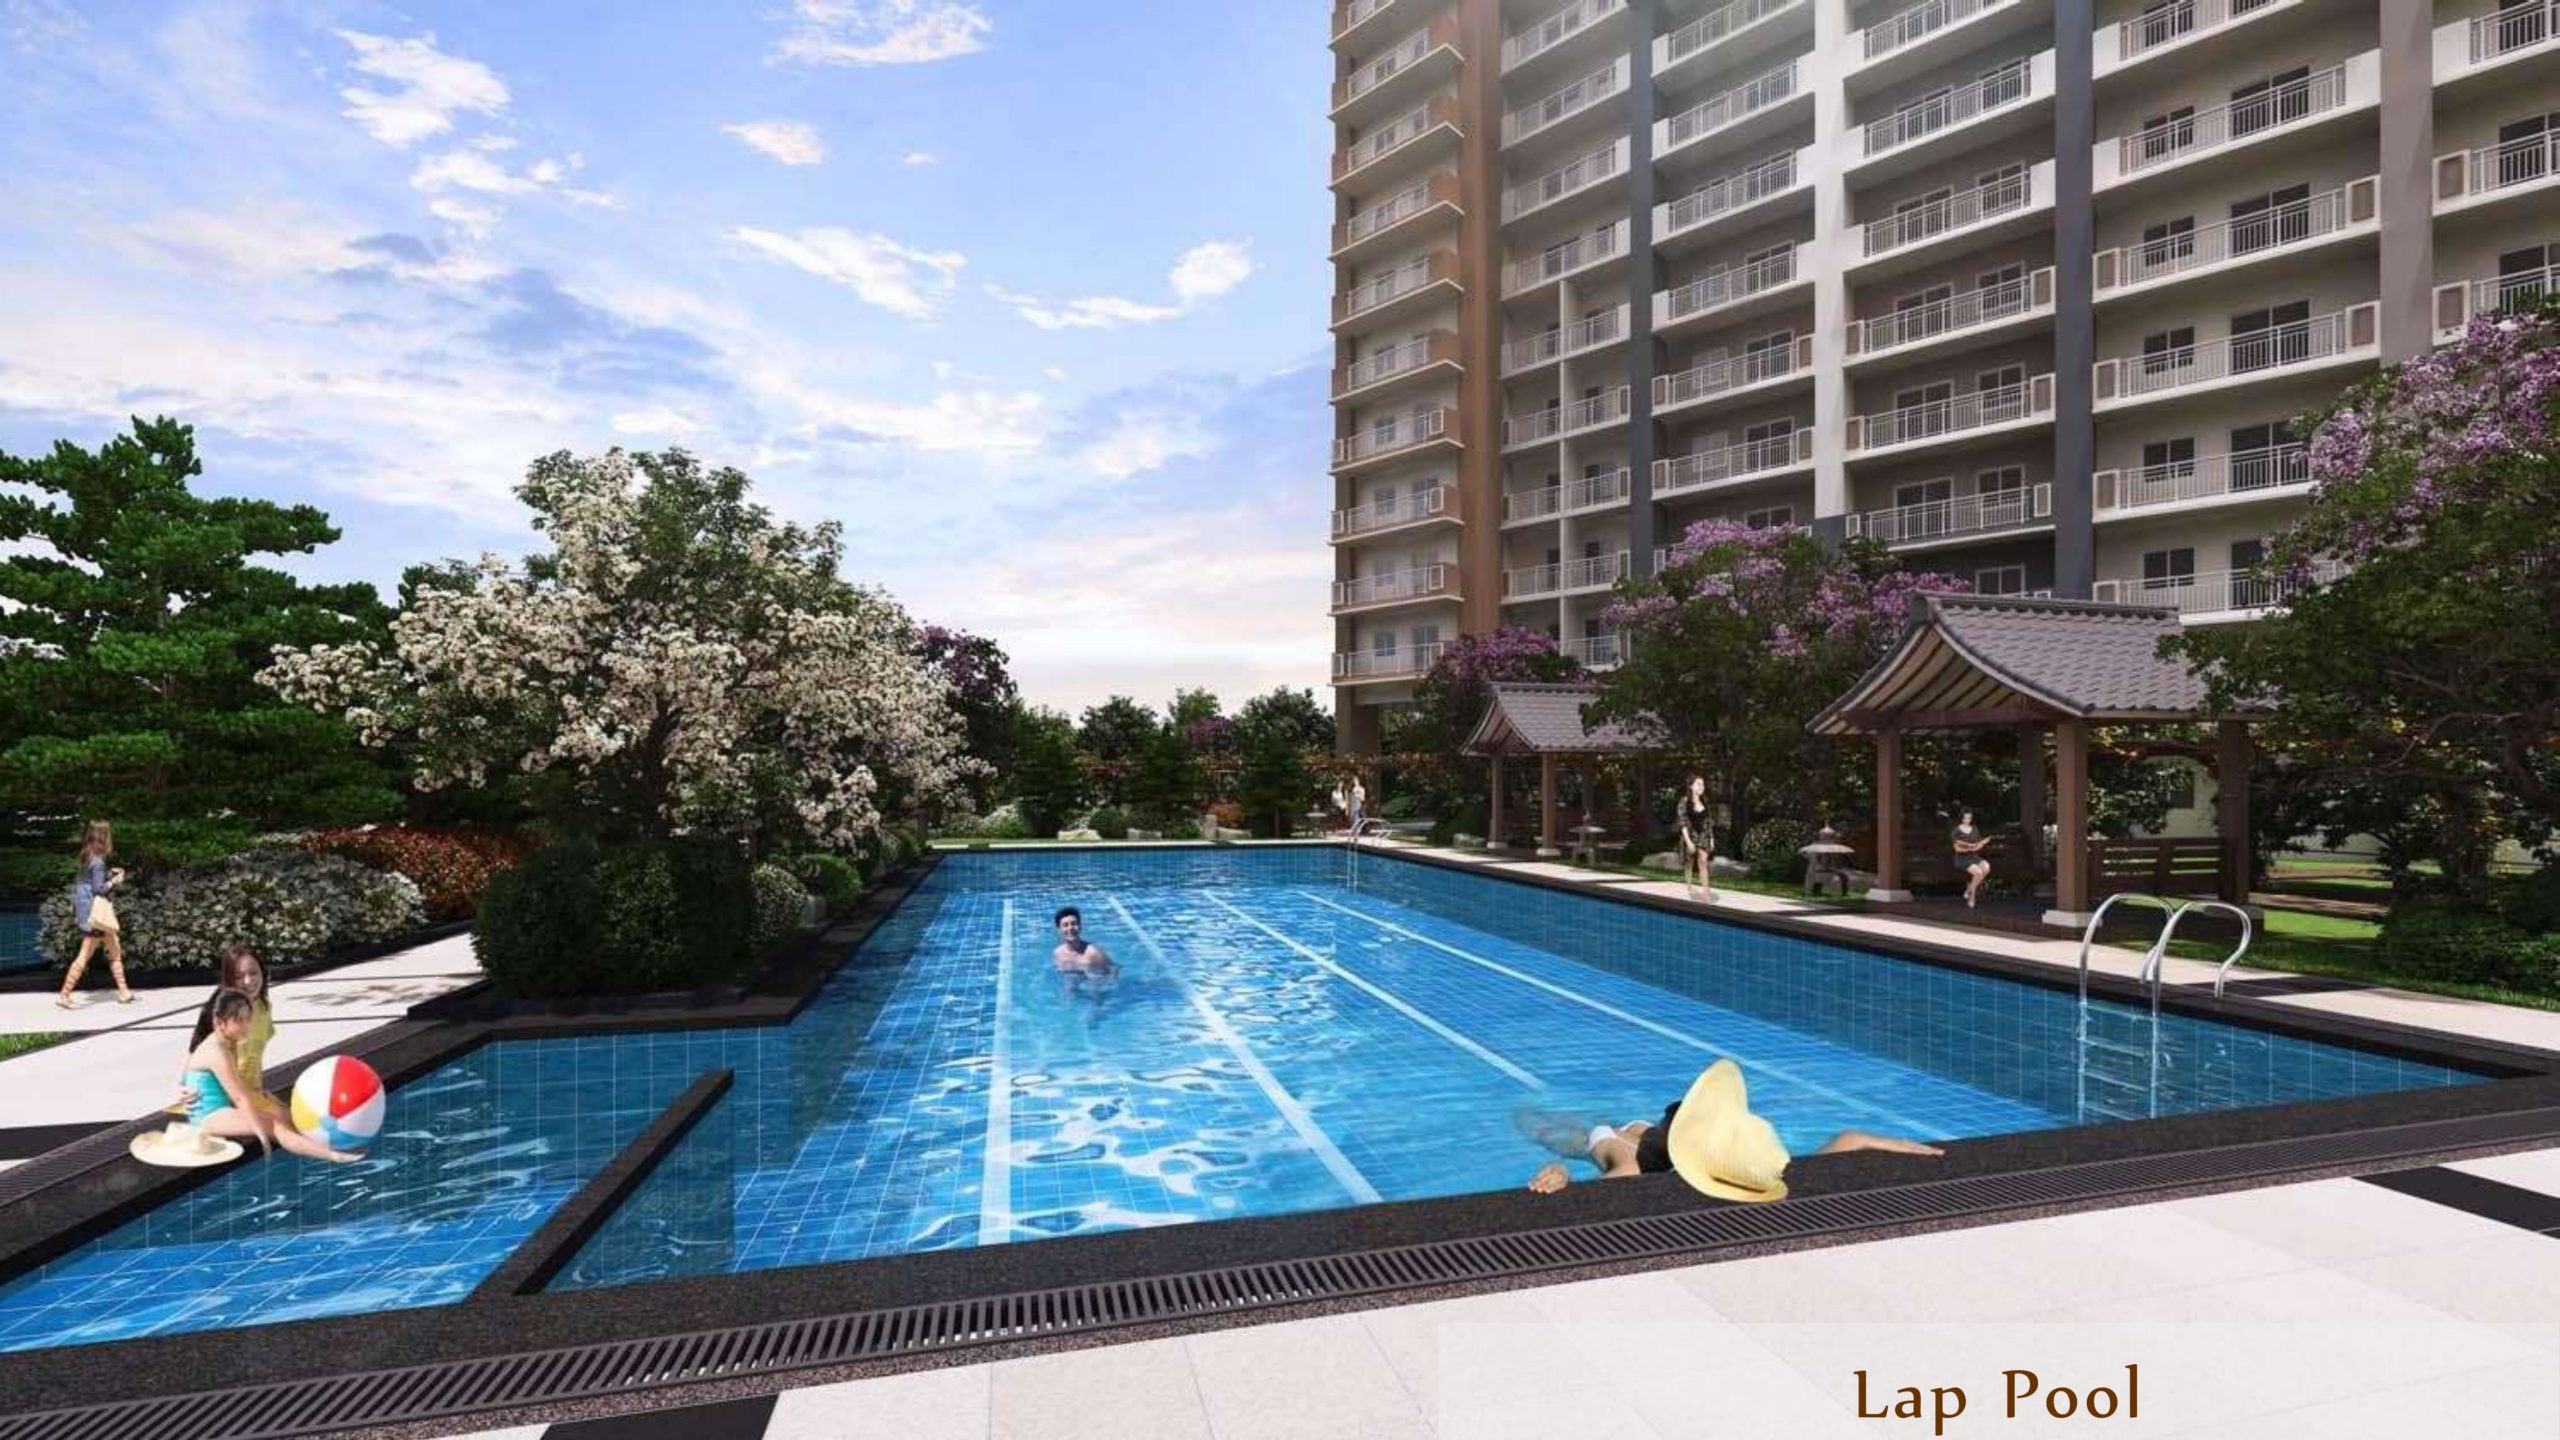 Kai Residences Features and Amenities